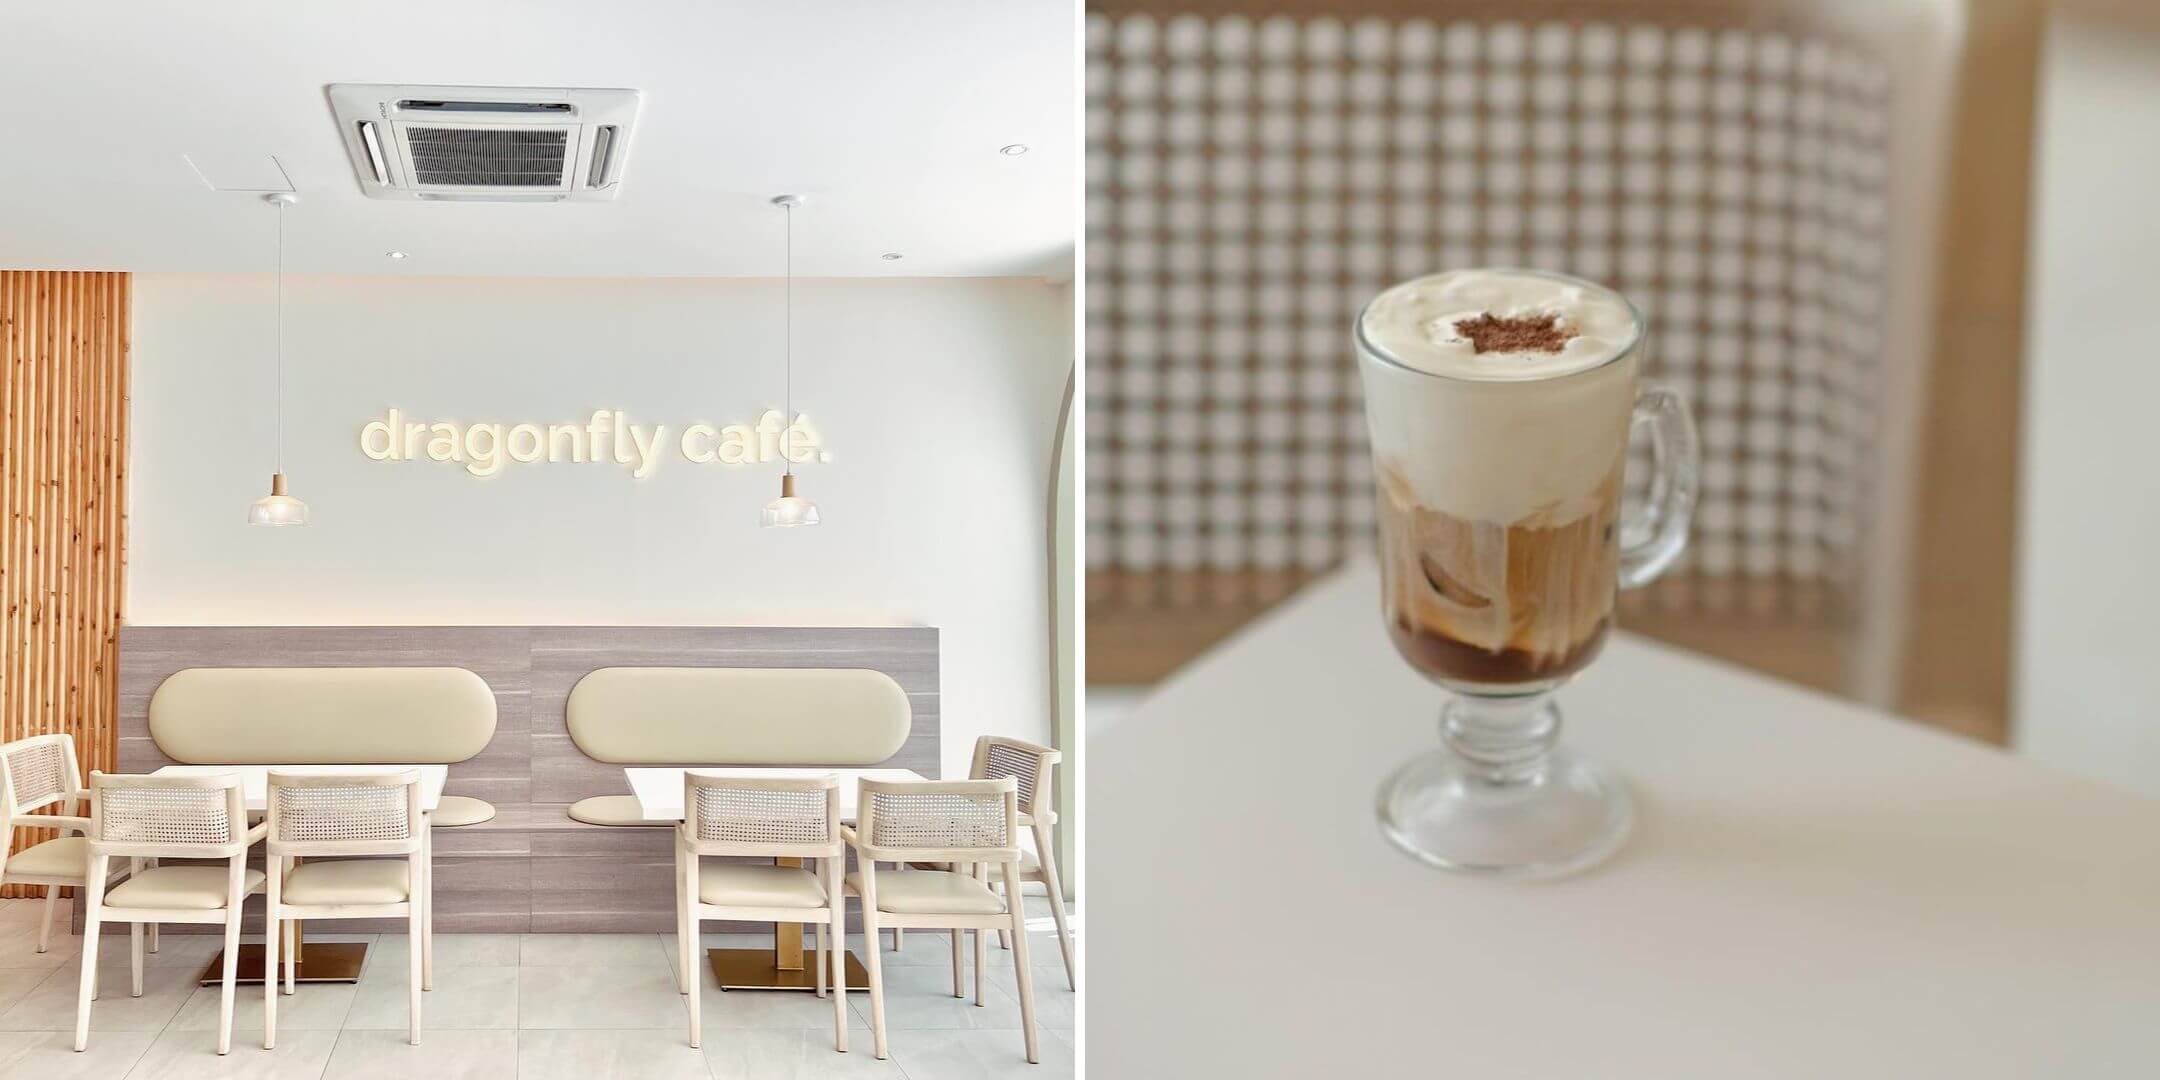 Dragonfly Cafe is one of the new Cebu cafes